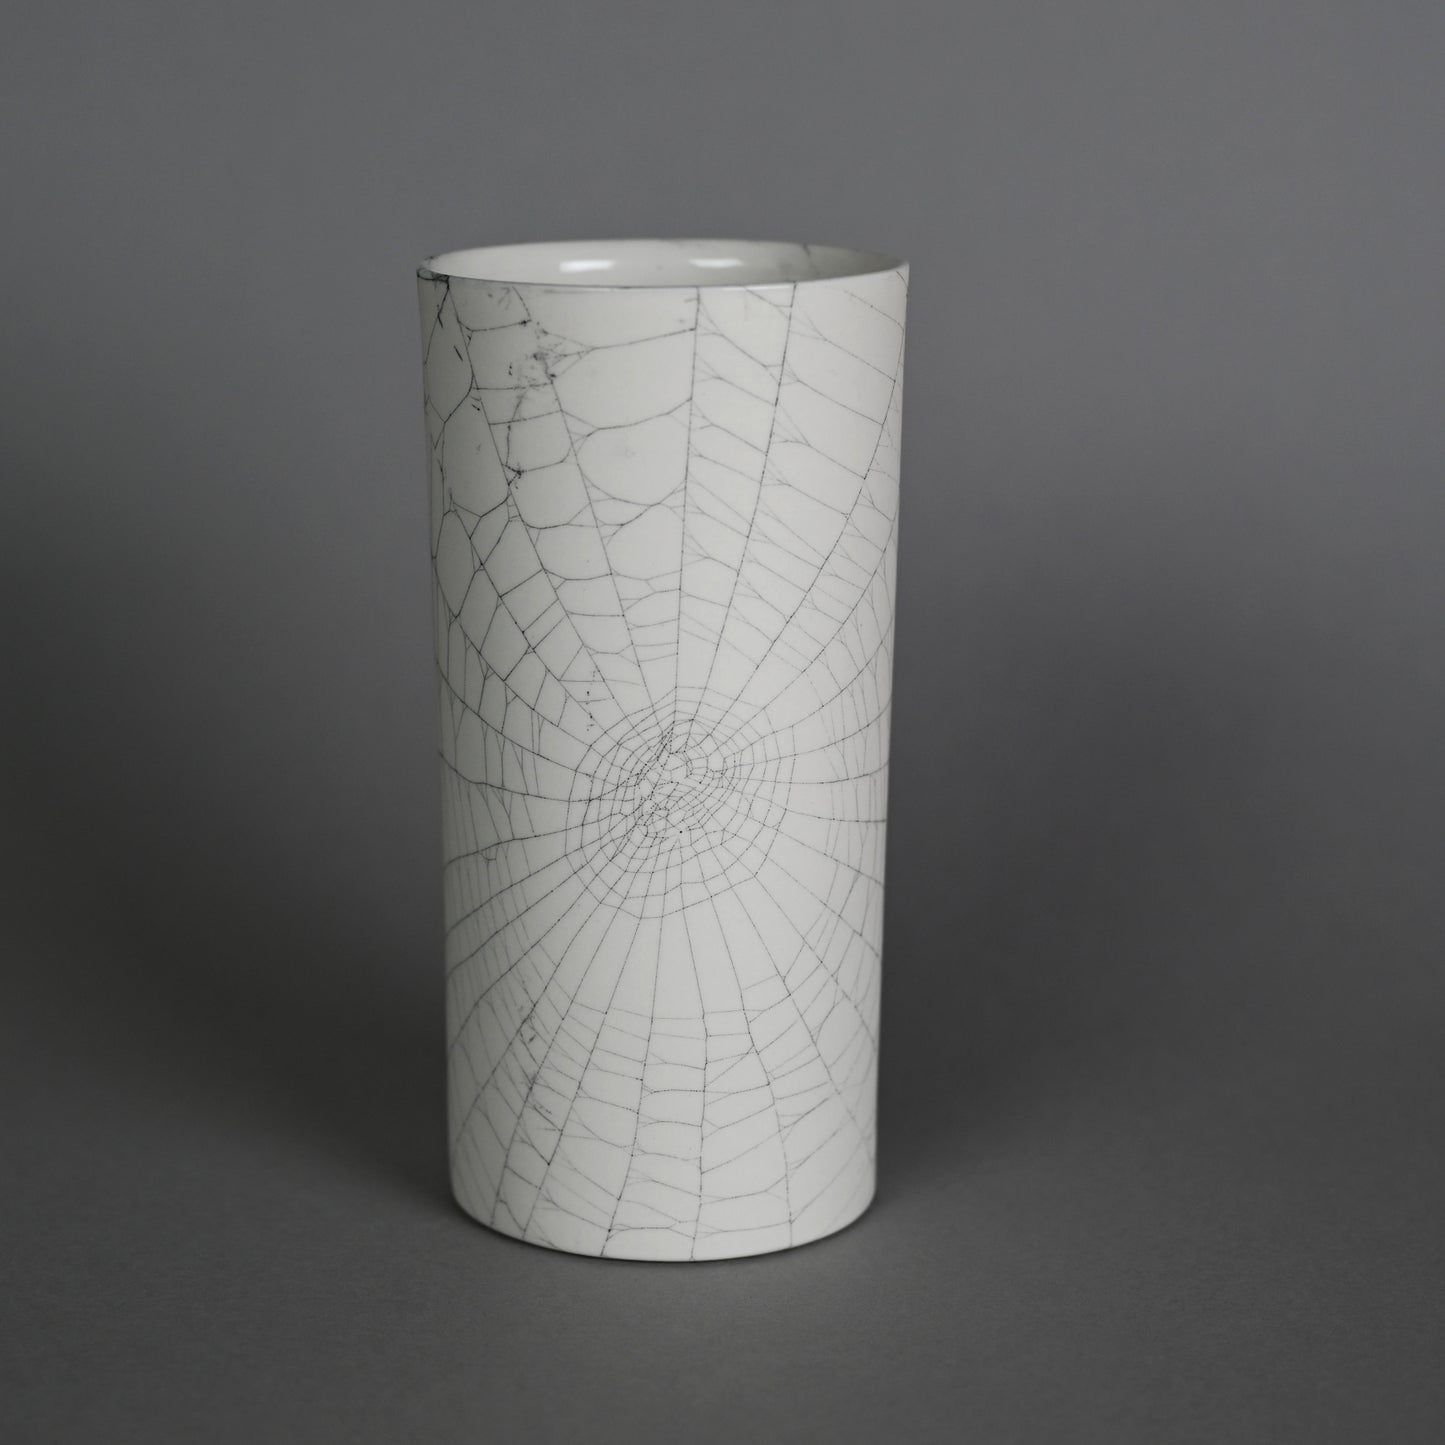 Web on Clay (188), Collected September 24, 2022